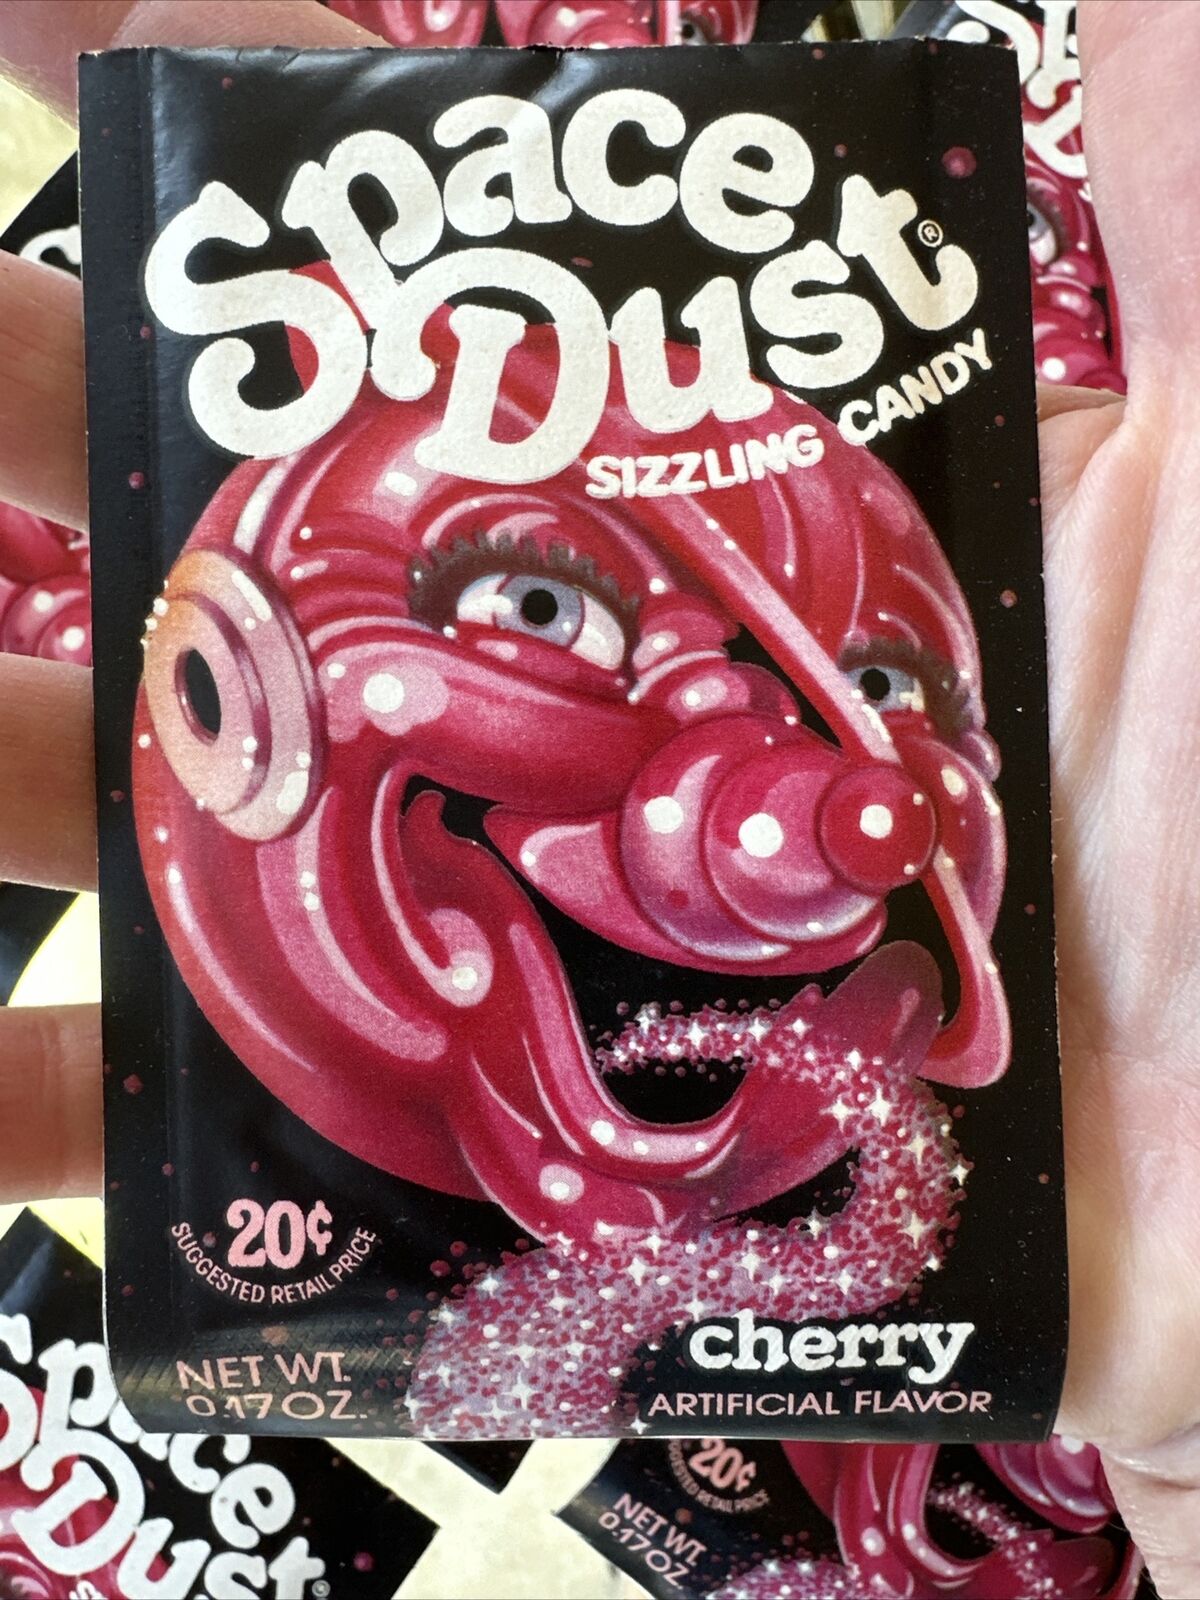 RARE Vintage 1970's SPACE DUST Sizzling Candy. Cherry, Unopened/New 1 pack